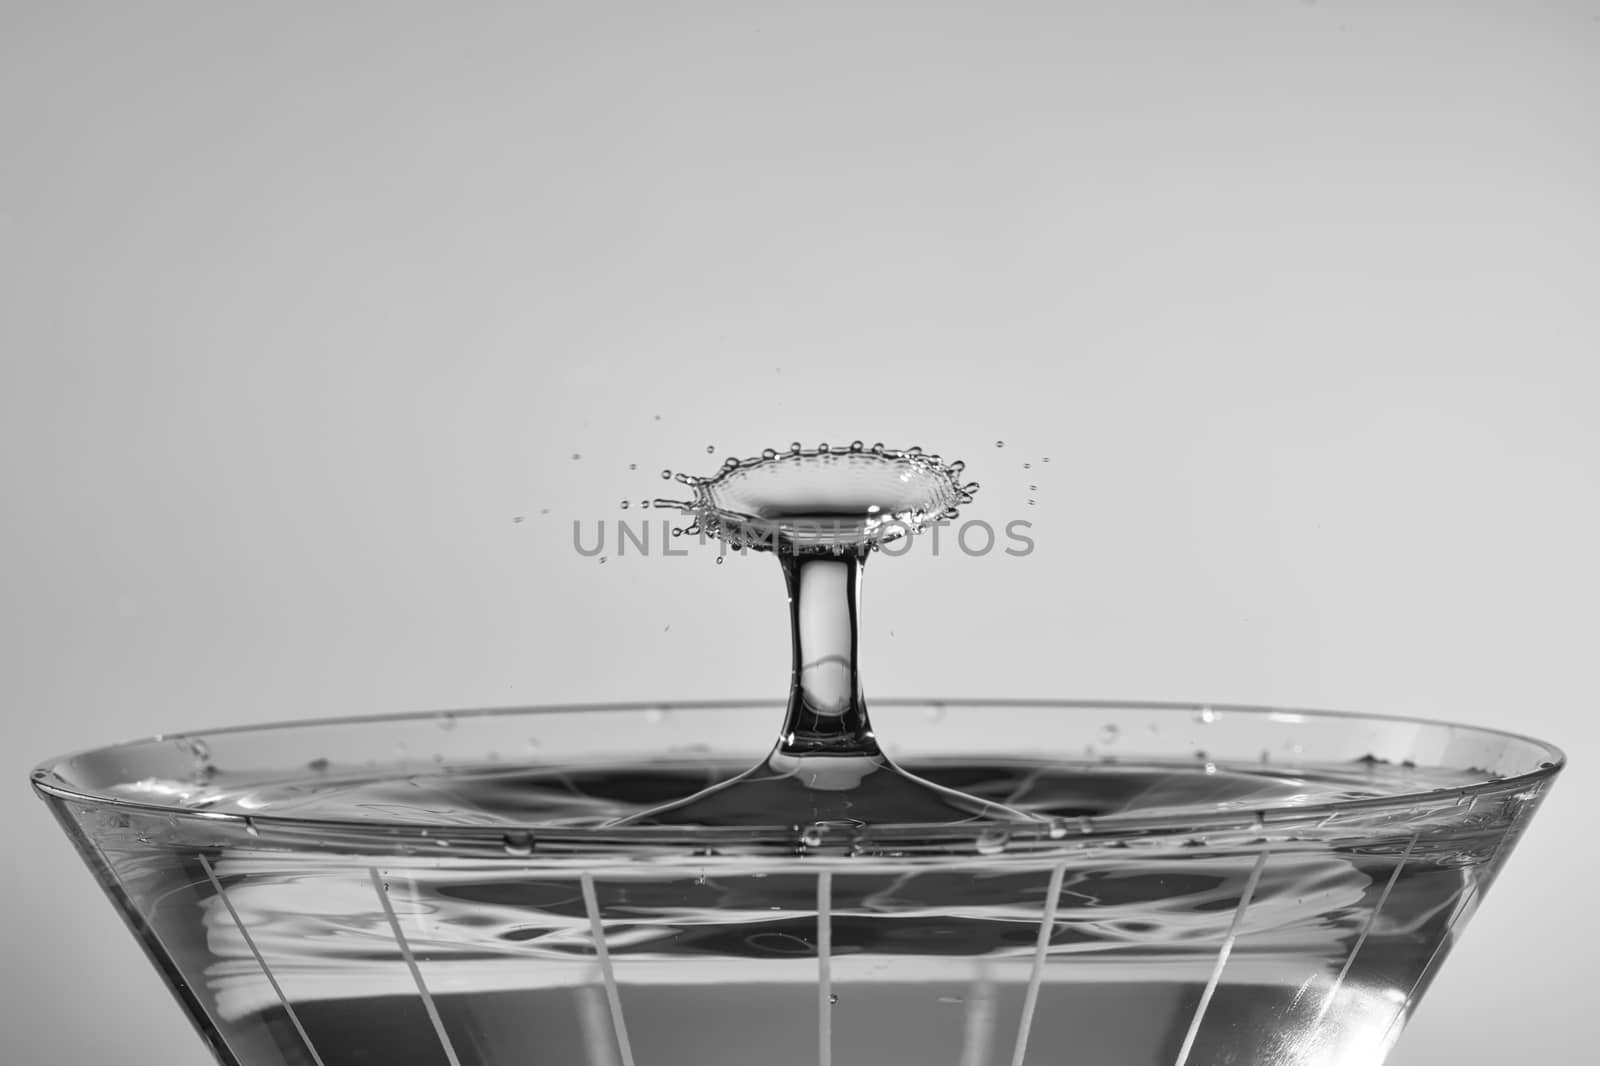 Water Drops Collide Over Martini Glass Monochrome by CharlieFloyd